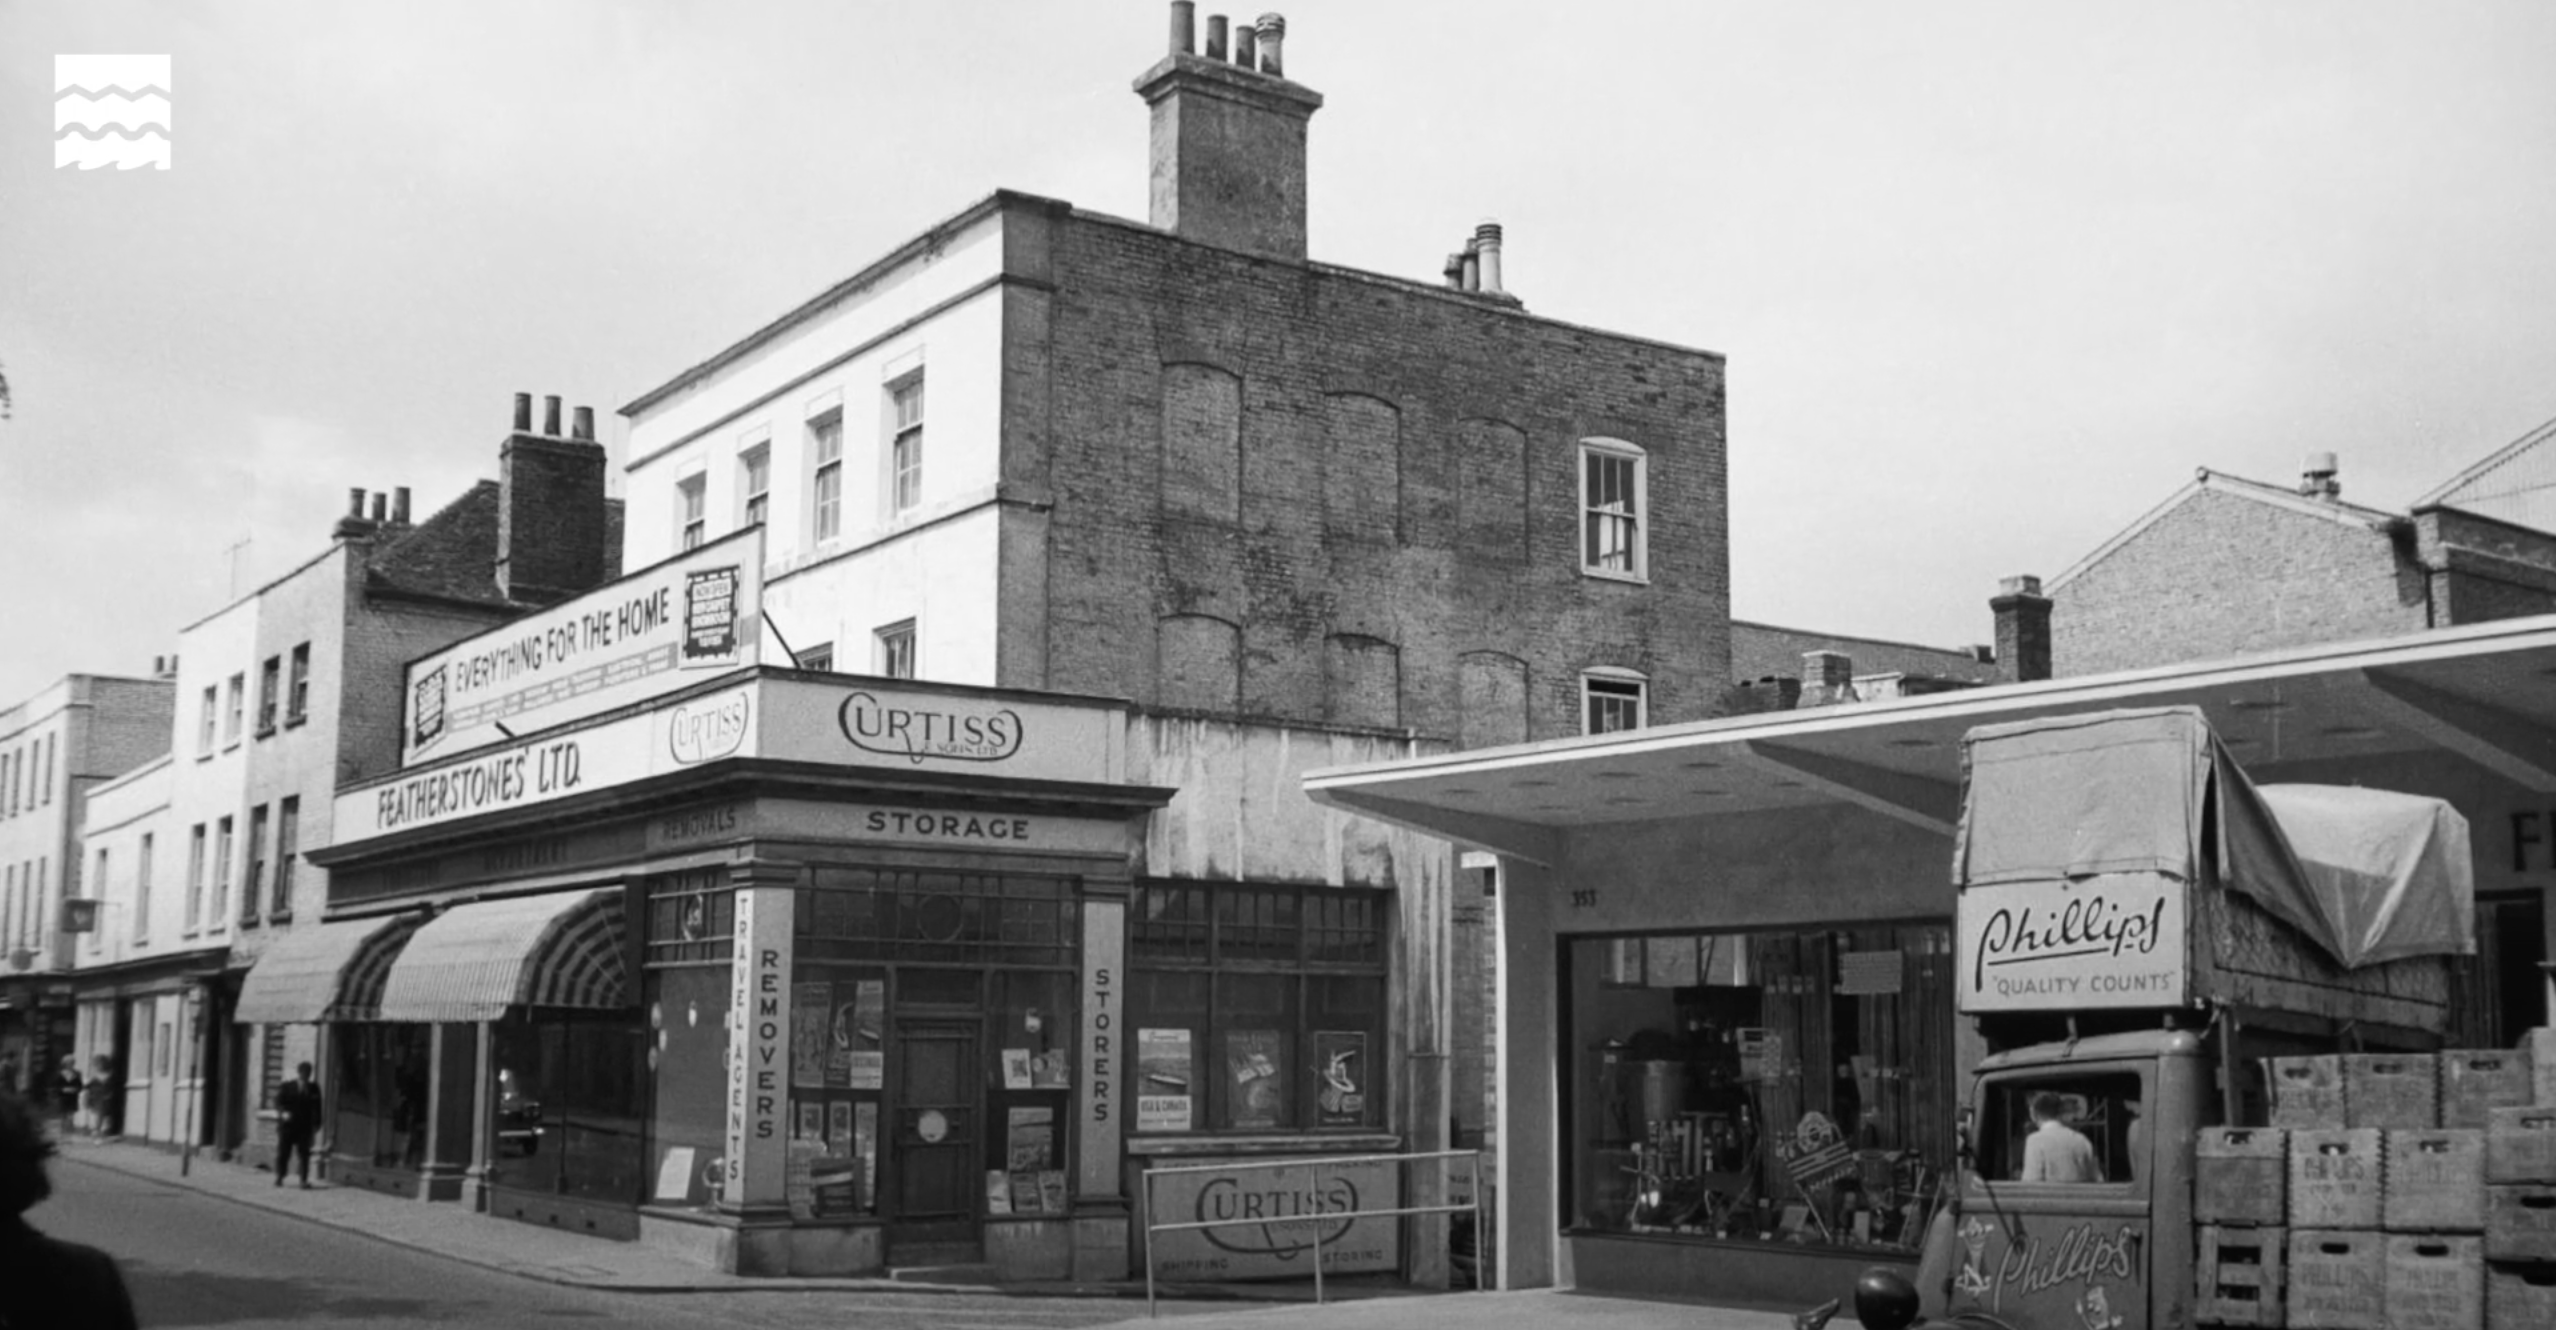 Between Chatham and Rochester: The Old Intra High Street | Historic England